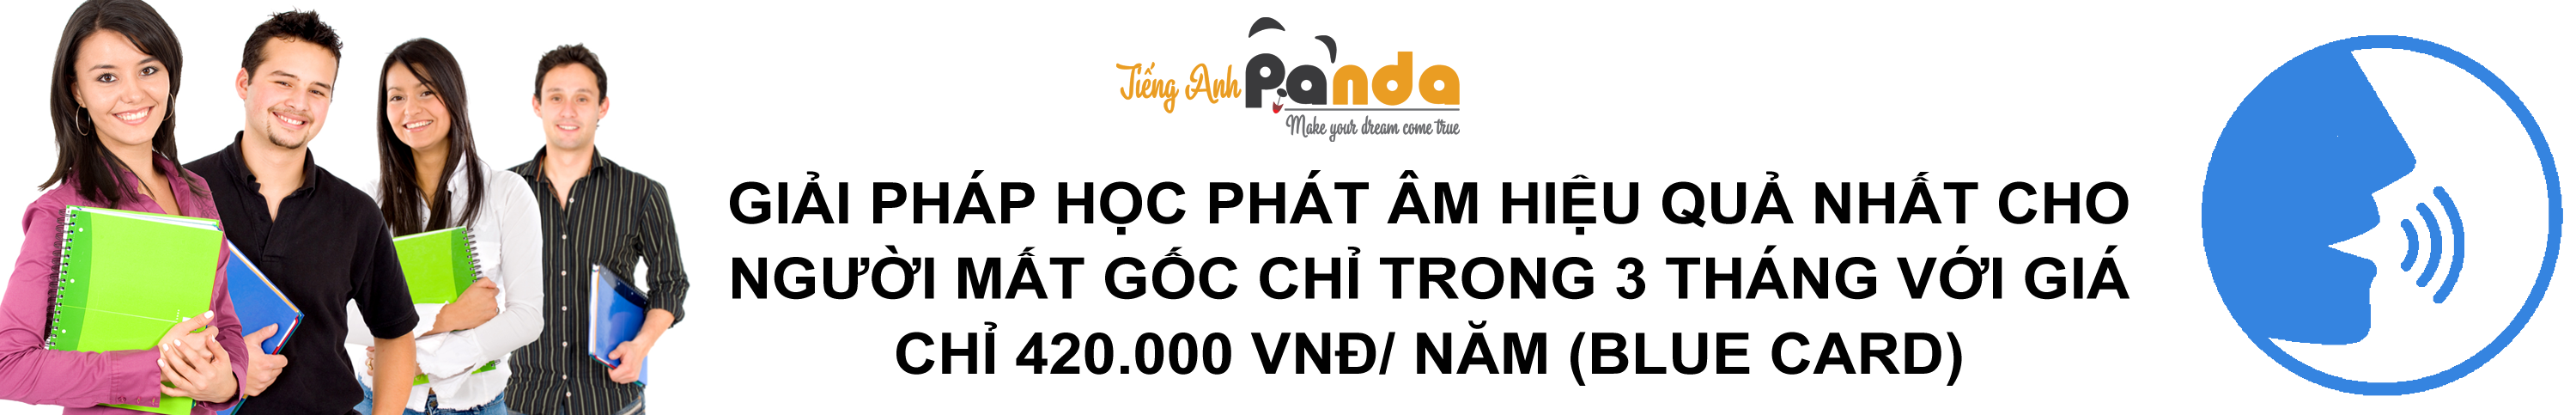 ANH 2